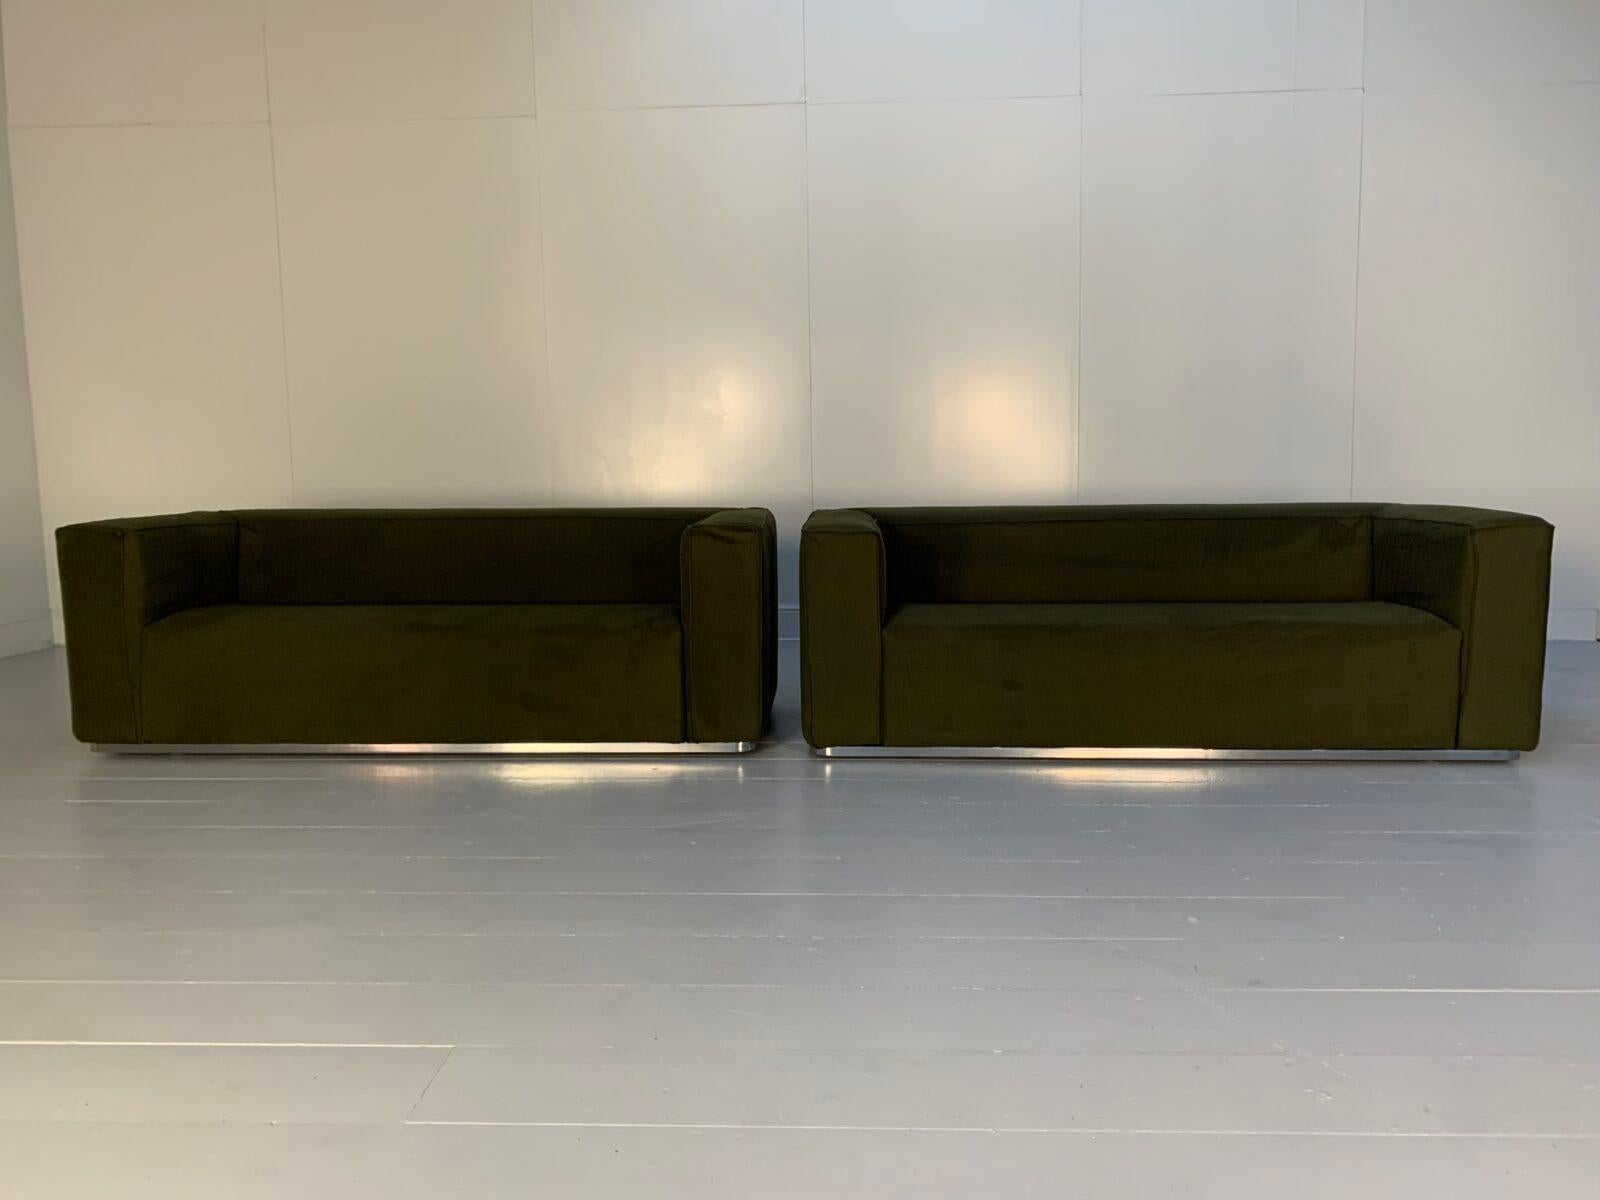 On offer on this occasion is ultra-rare (i suspect you will not find another) superb, immaculately-presented, identical-pair of 2.5-Seat “180 Blox” Sofas, from the world renown Italian furniture house of Cassina.

As you will no doubt be aware by